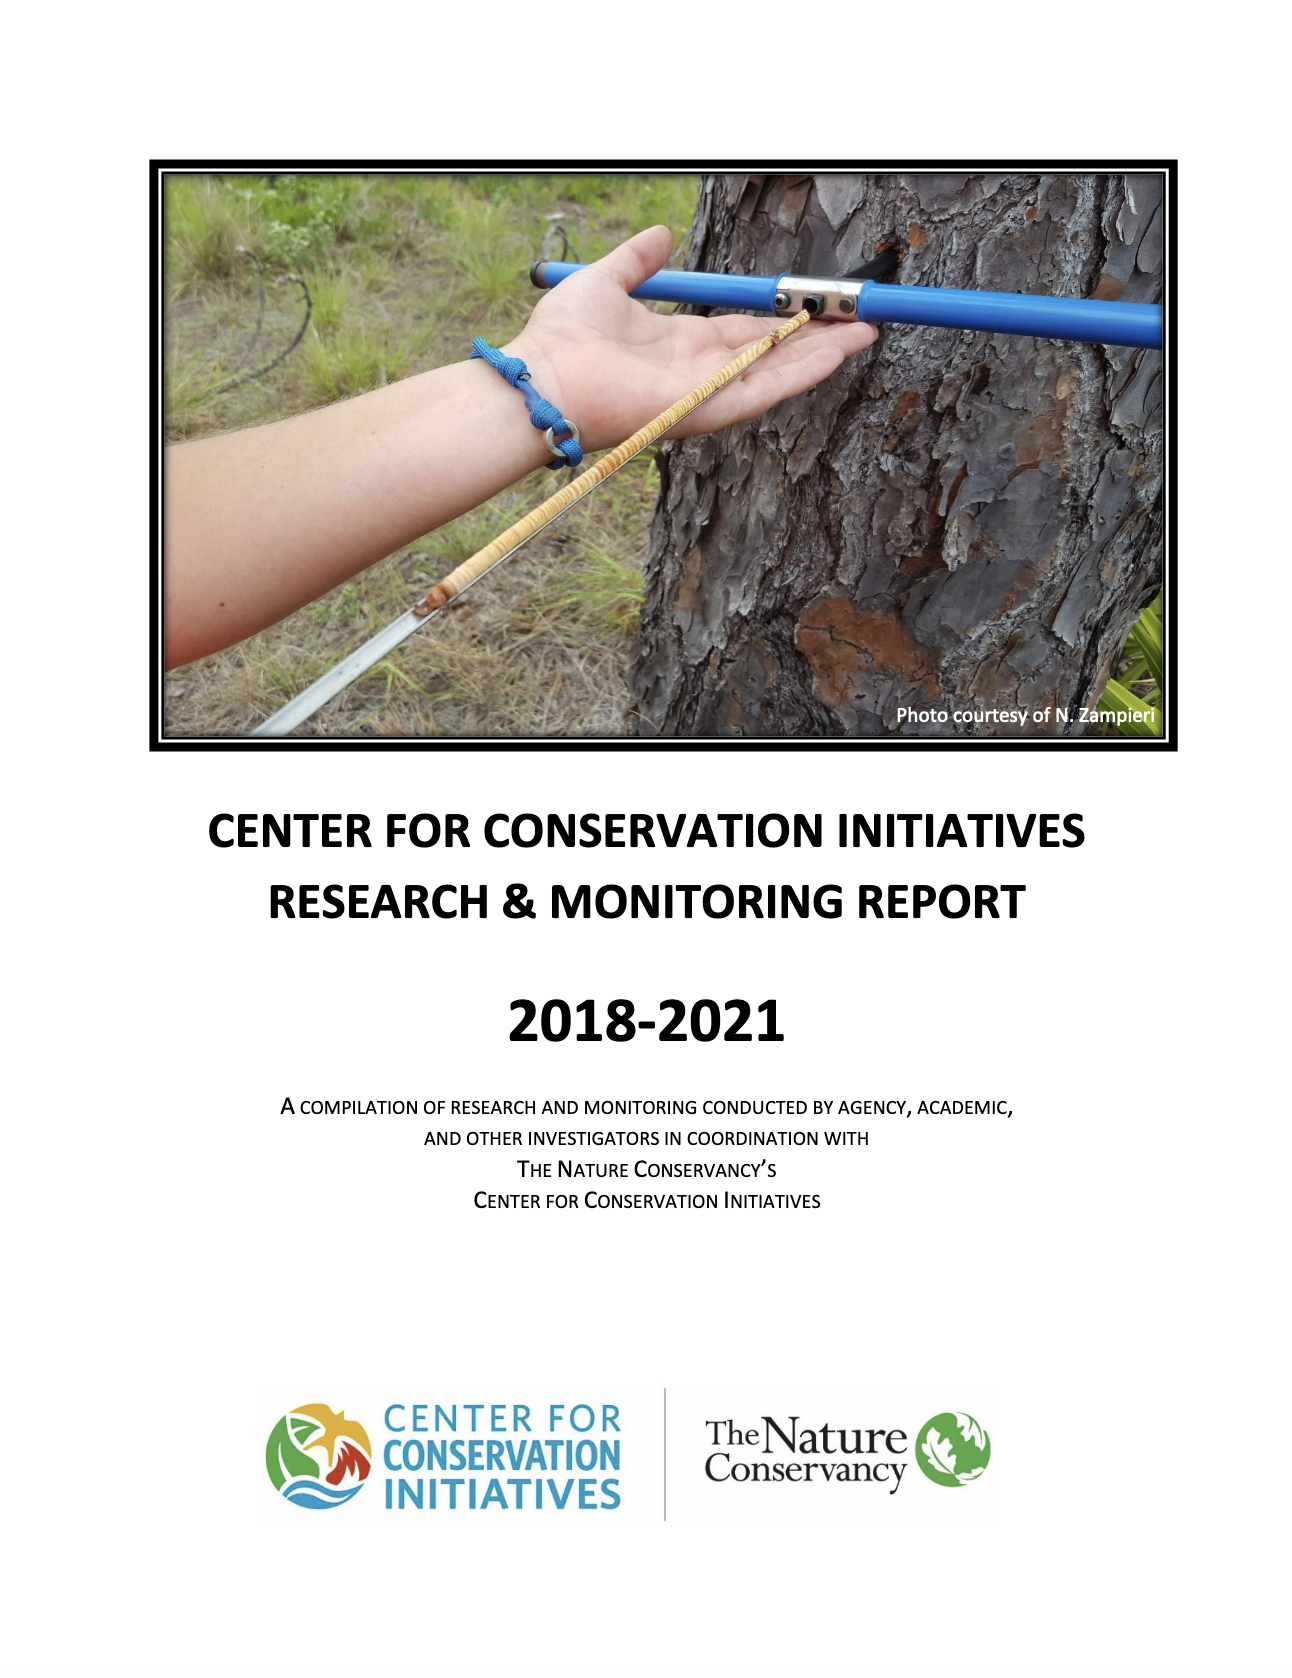 Center for Conservation Initiatives Research and Monitoring Report 2018-2021